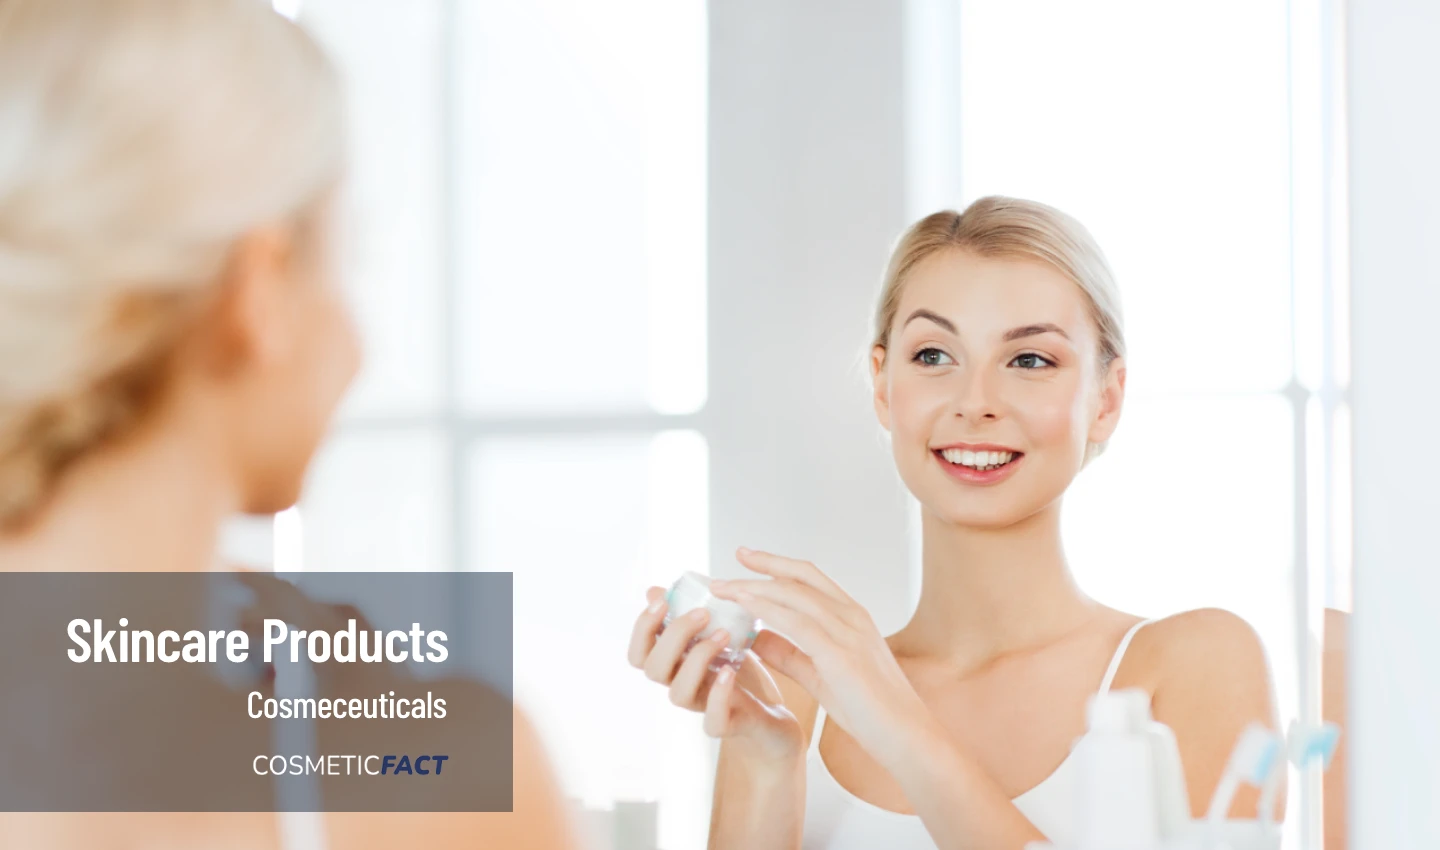 A woman looks at herself in the mirror after exfoliation skincare, showcasing a radiant complexion.